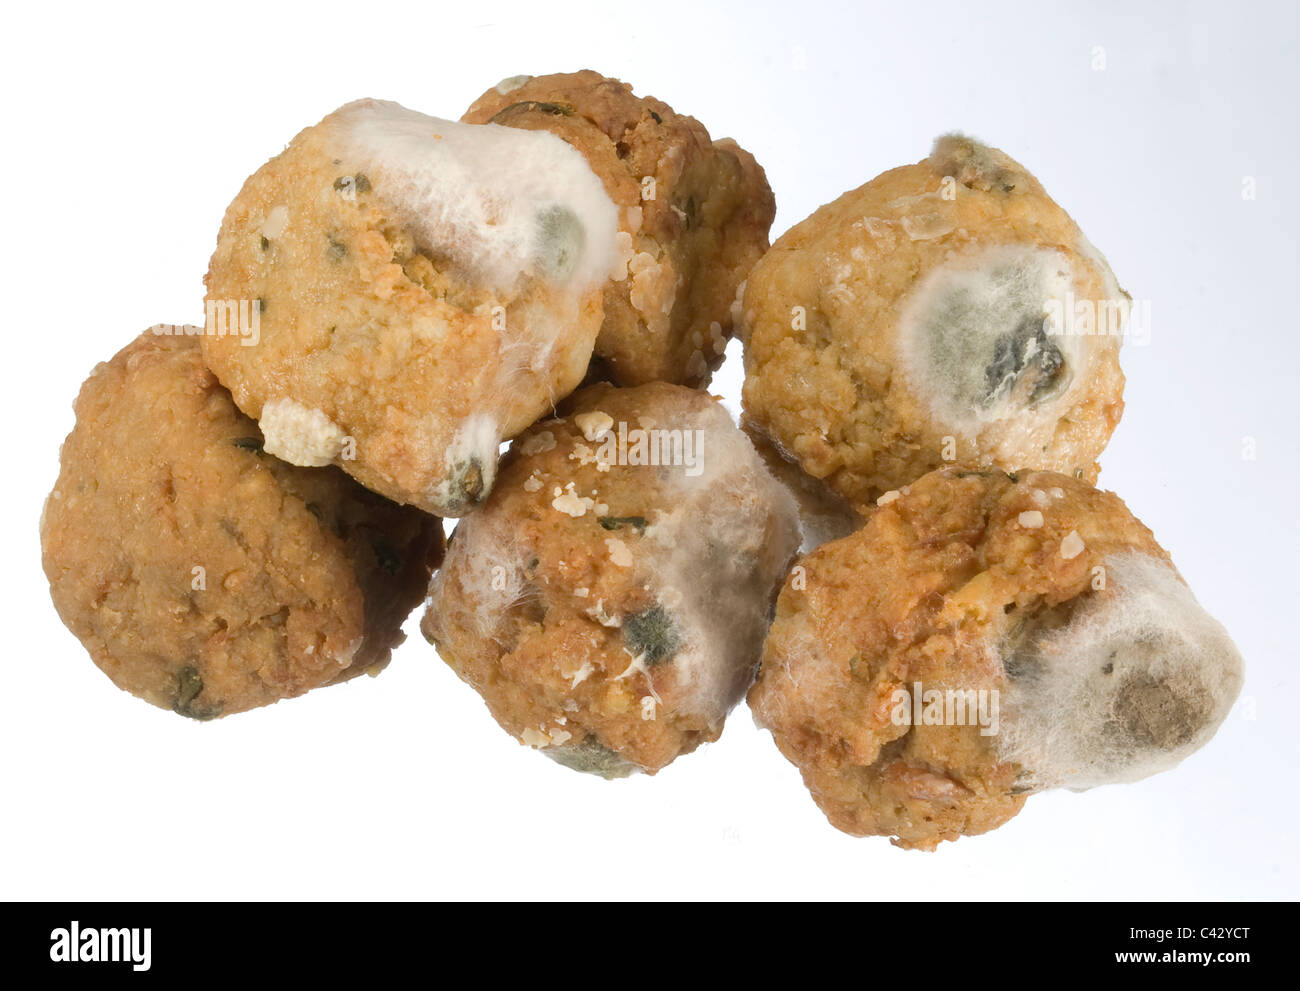 Rotten moldy cooked meat balls which are putrefying Stock Photo